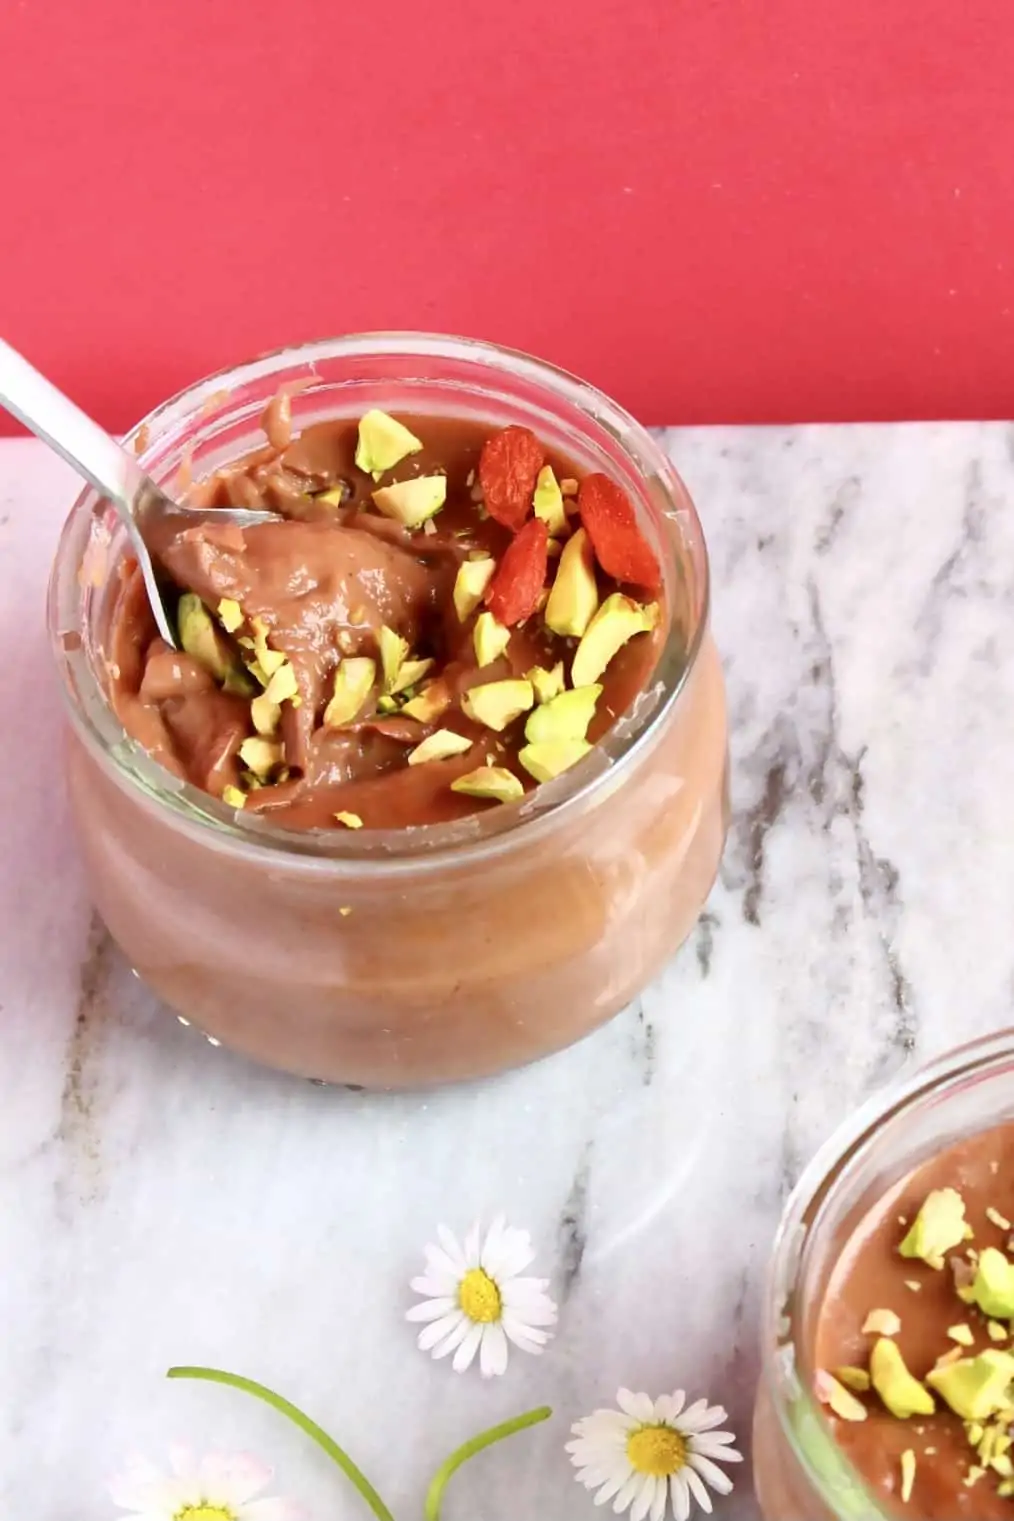 A vegan chocolate pudding pot with a spoon taking out a mouthful